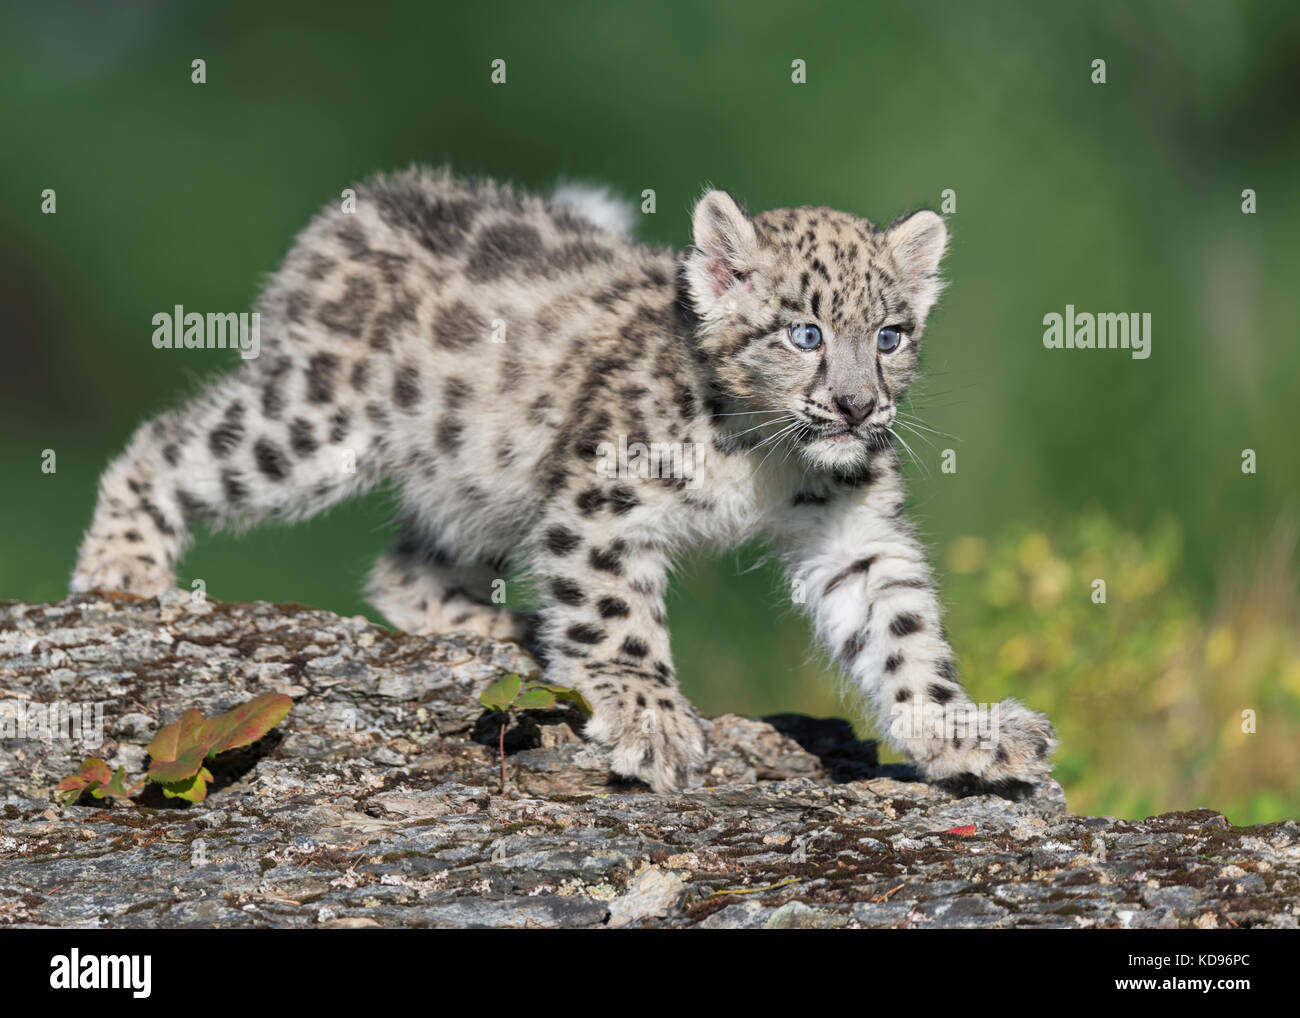 Single snow leopard cub prowling on rocky surface Stock Photo